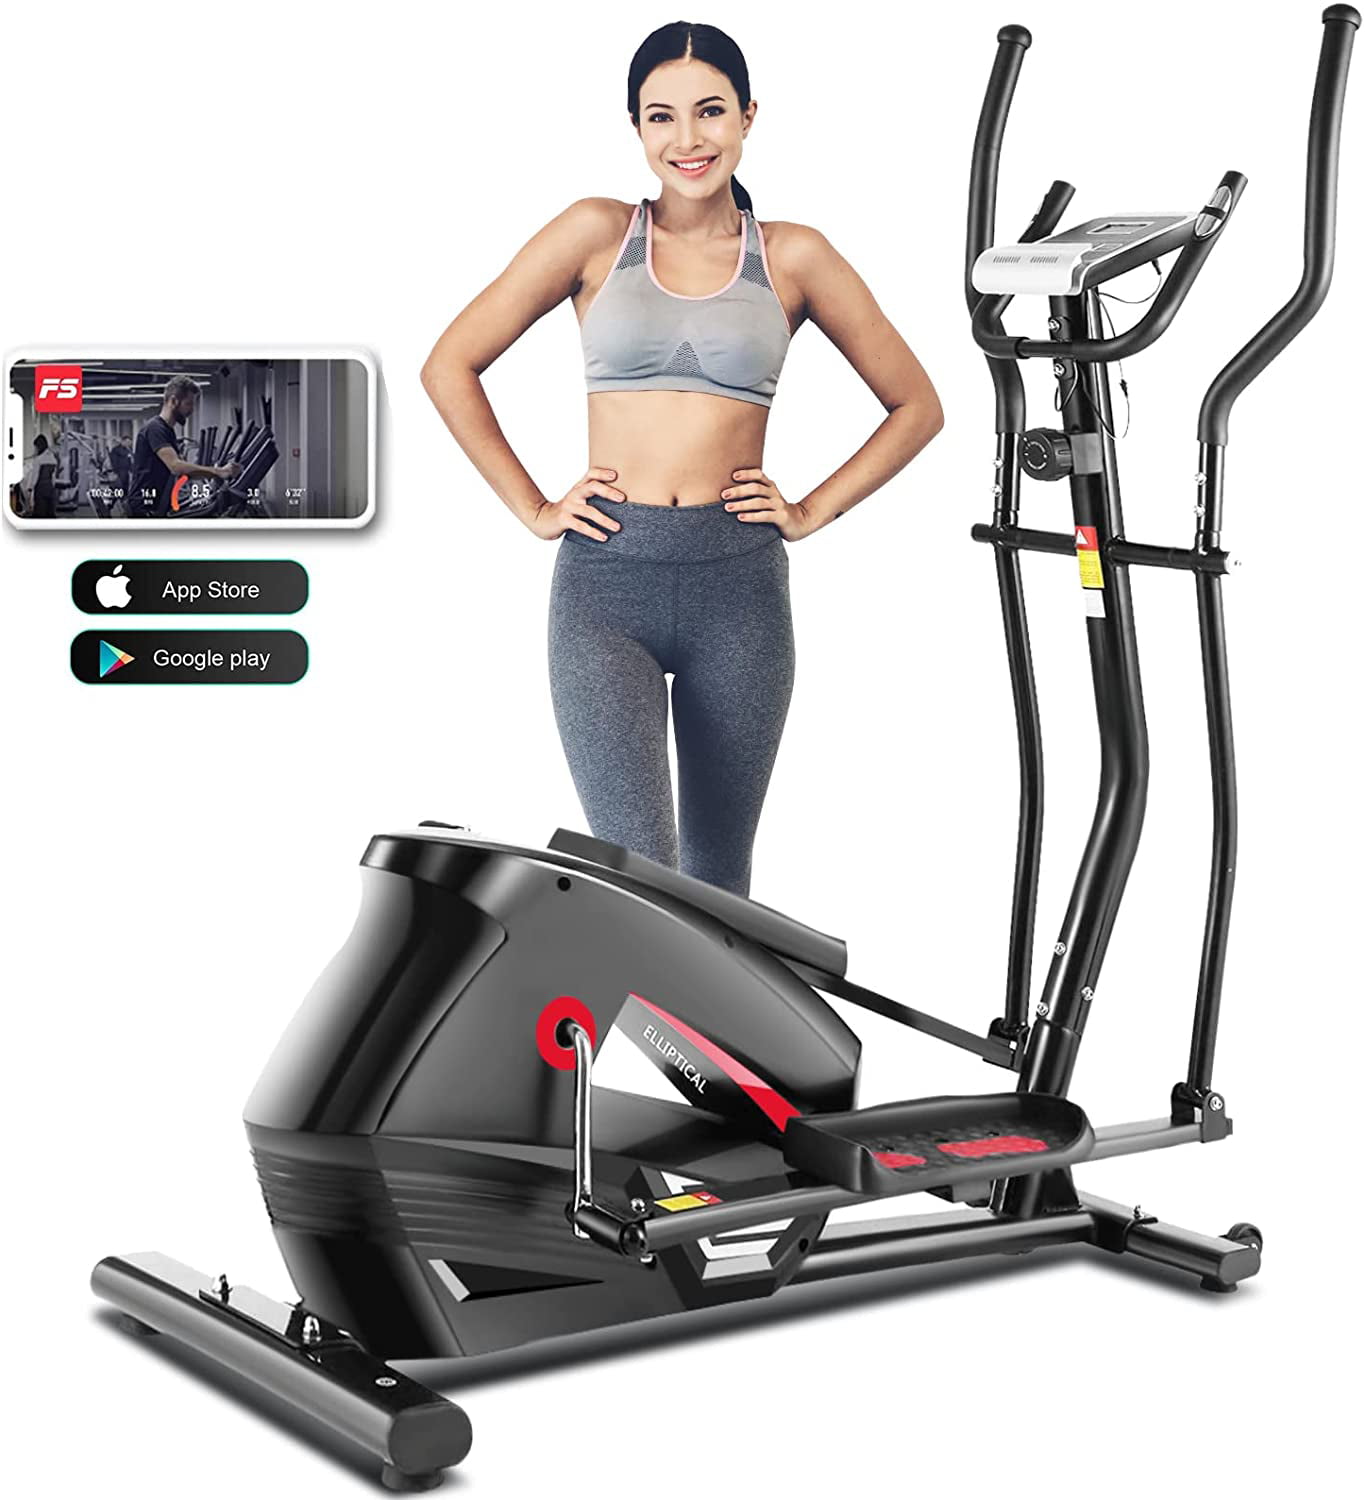 ANCHEER APP Elliptical Machine 2022 Newest Magnetic Elliptical Machine for Home Use with Adjustable 10 Level Magnetic Resistance for Indoor Fitness Gym Workout Max Weight Capacity 390Lbs 